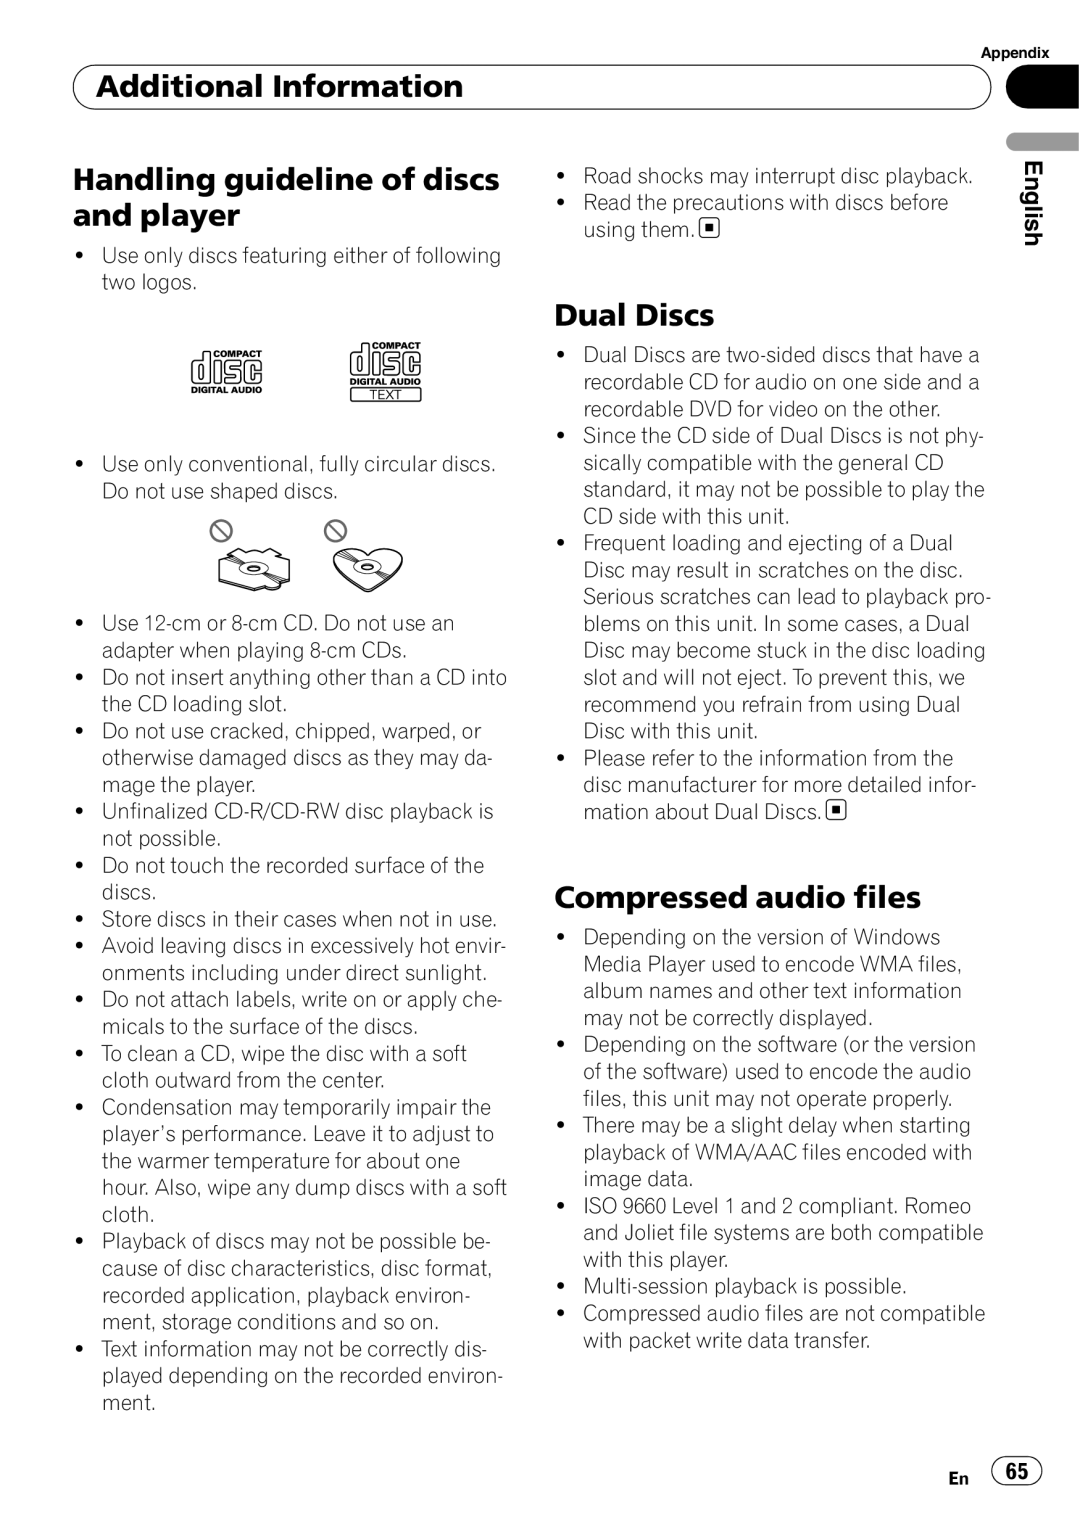 Pioneer DEH-P85BT Handling guideline of discs and player, Dual Discs, Compressed audio files, Additional Information 